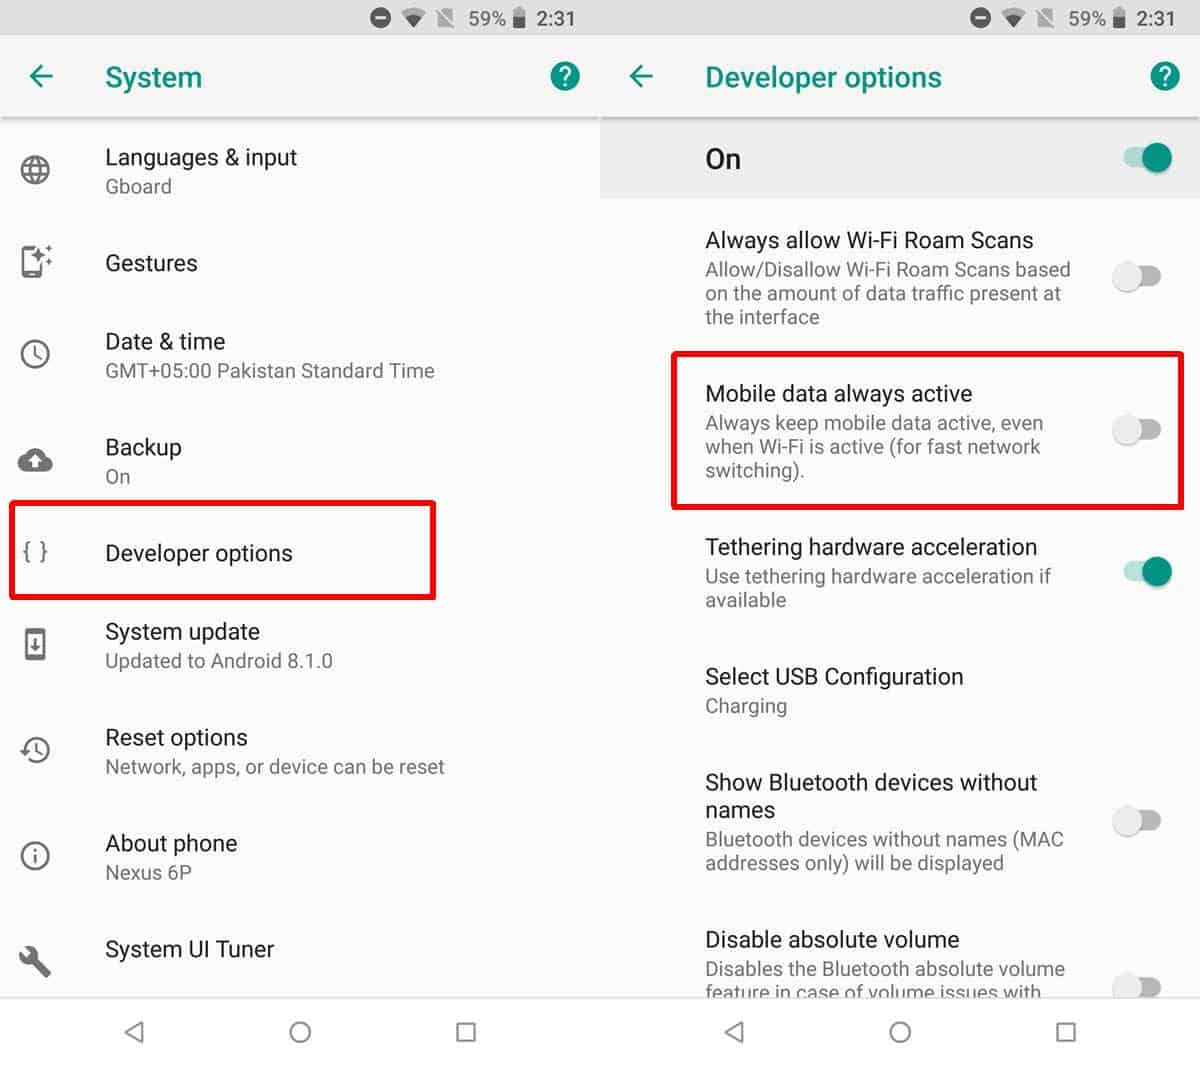 How To Change Download Settings From Wi-Fi To Mobile Data